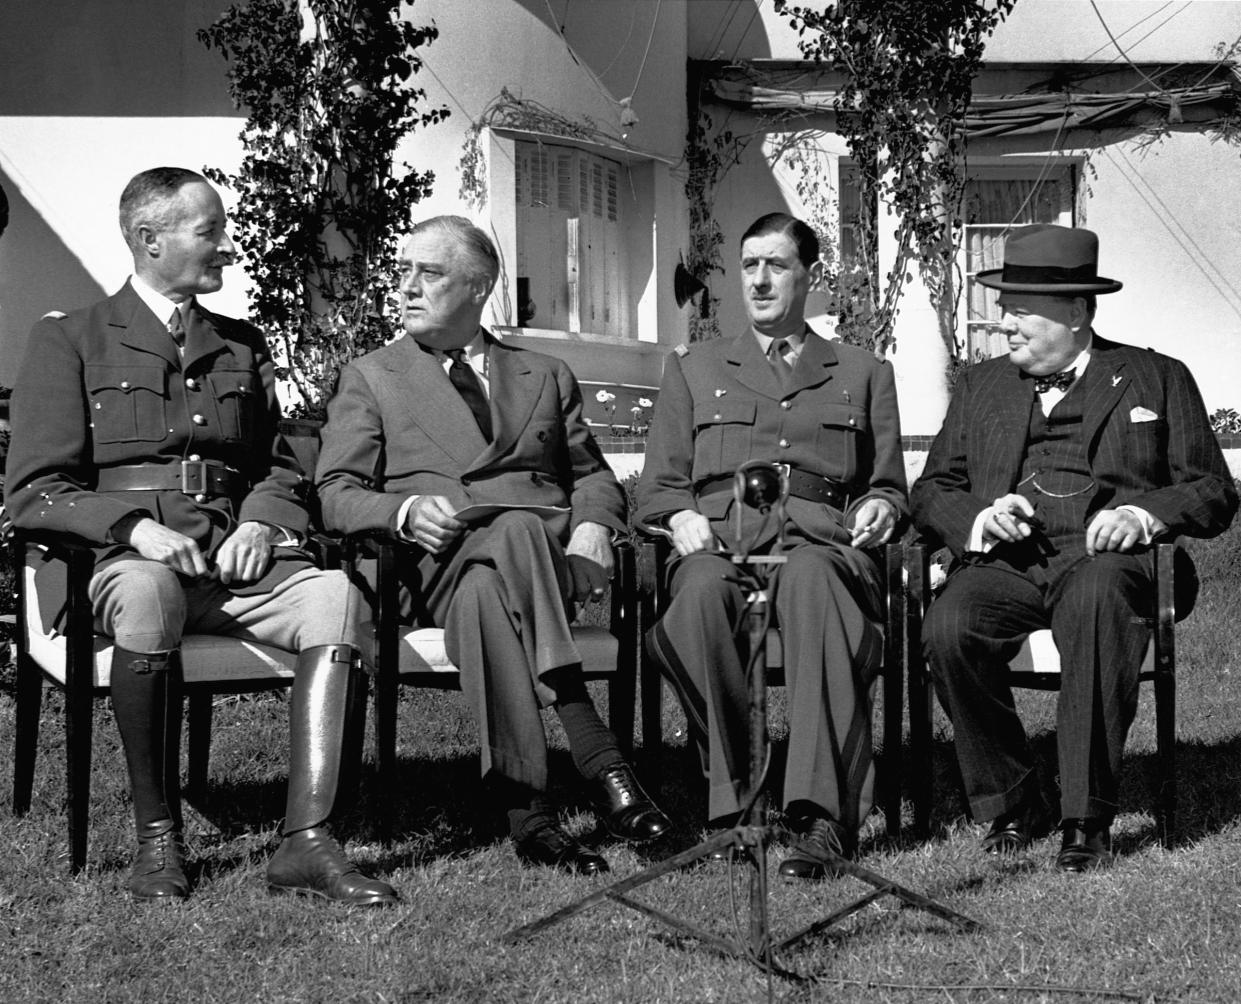 (L-R) General Henri Giraud, Franklin Delano Roosevelt, Charles de Gaulle, and Winston Churchill at the Casablanca Conference in 1943.